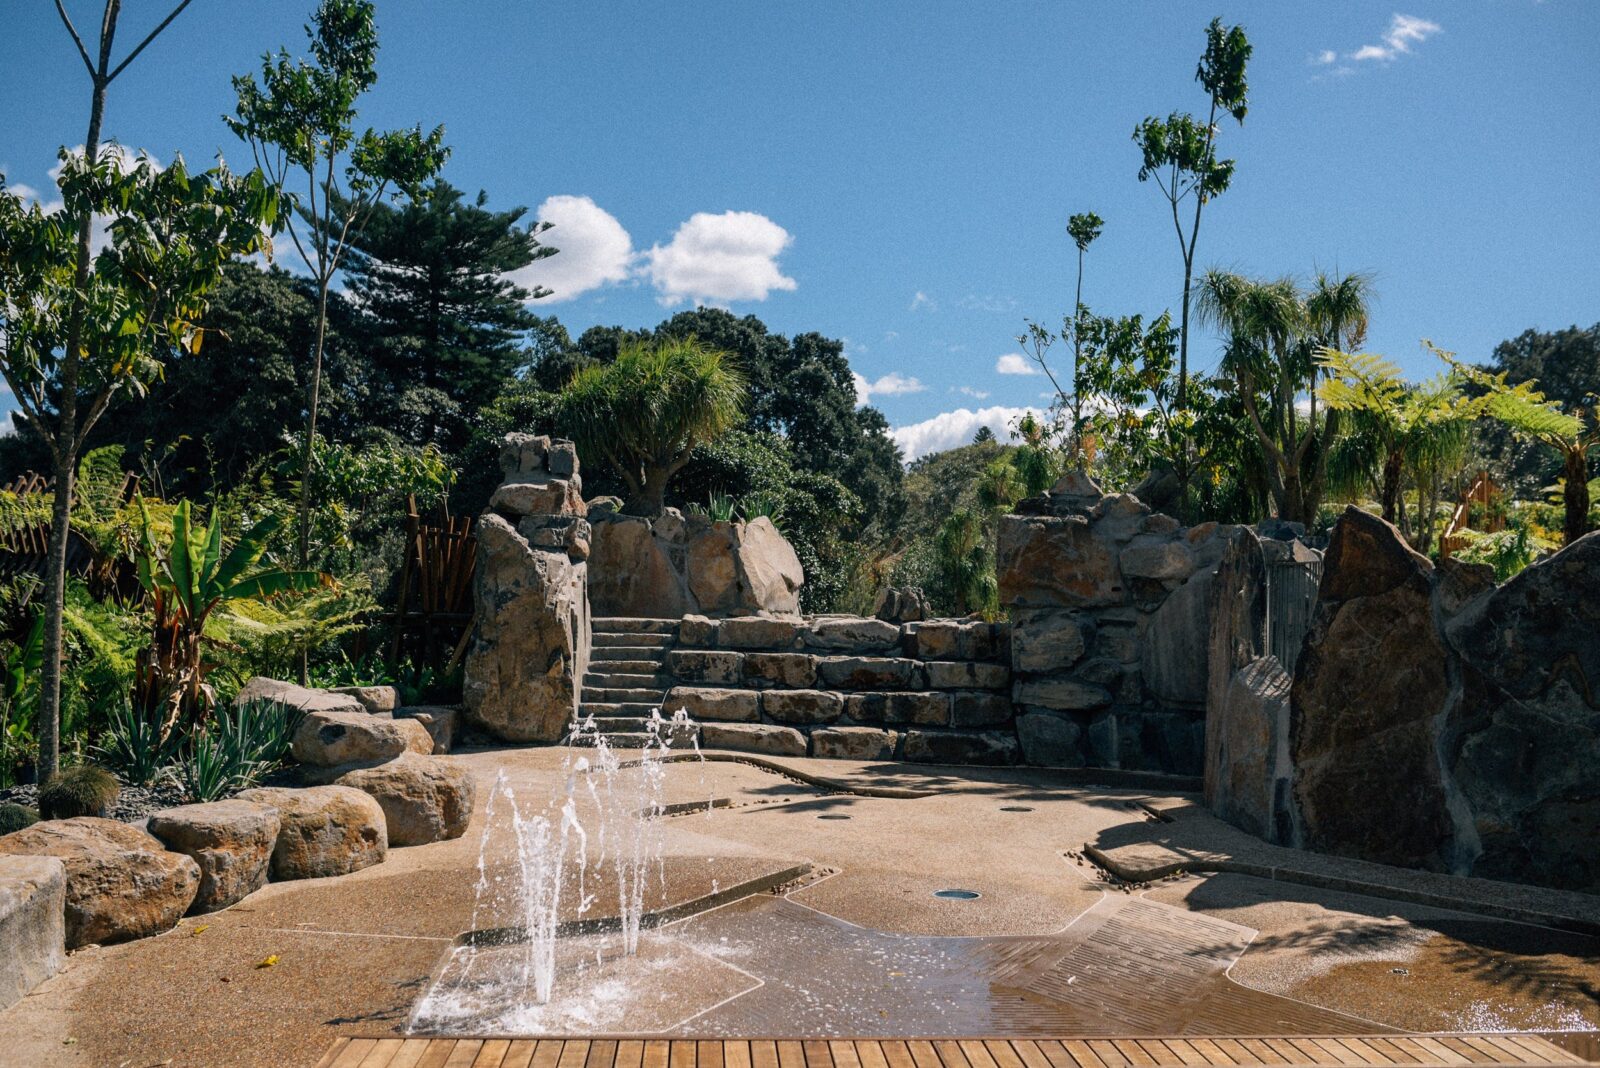 Water feature at The Ian Potter Children's WILD PLAY Garden